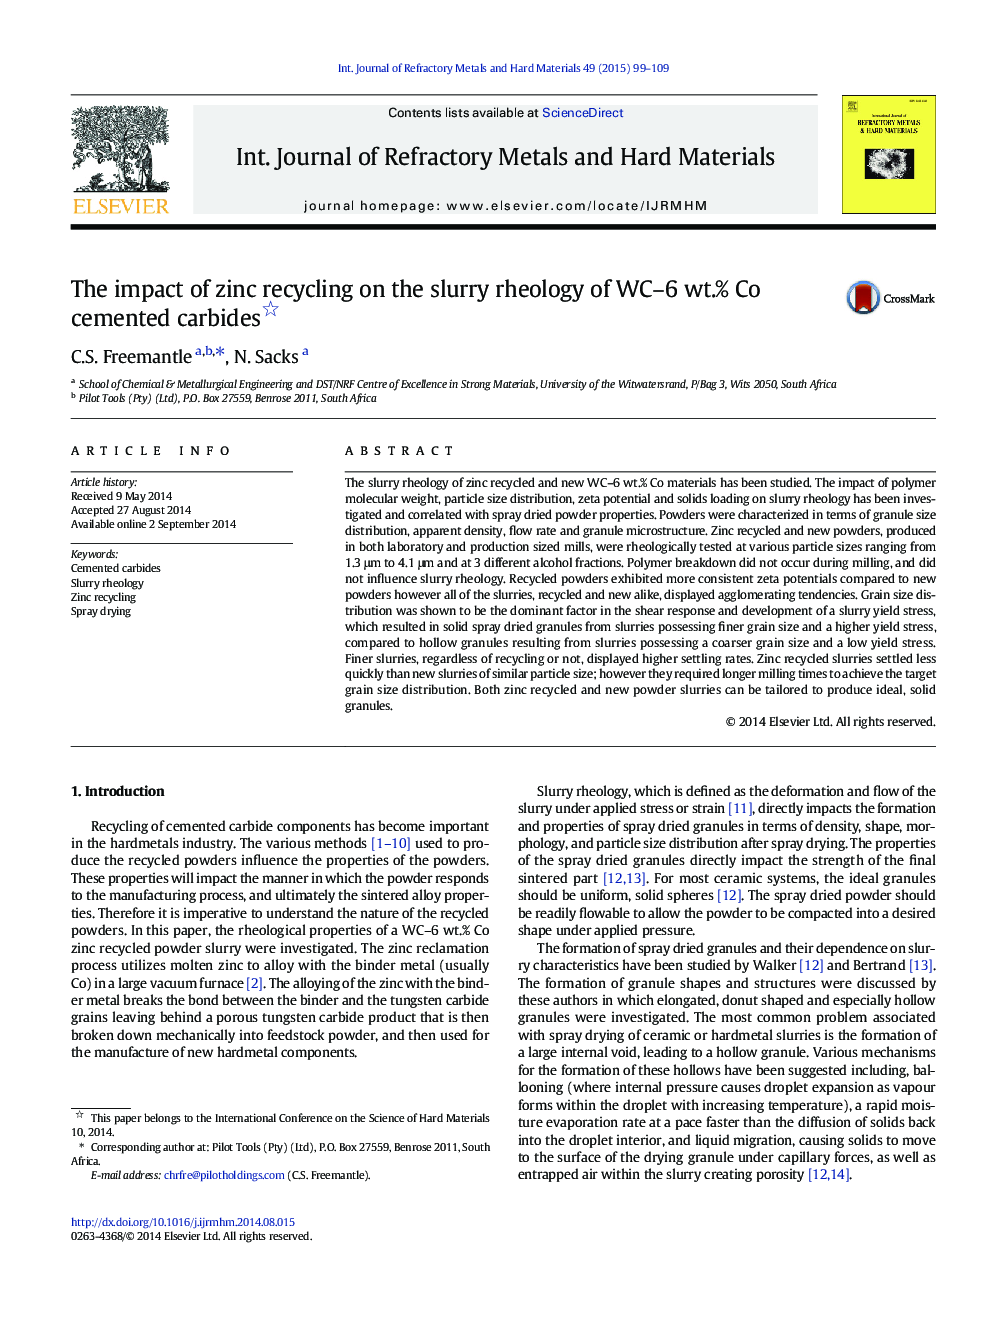 The impact of zinc recycling on the slurry rheology of WC–6 wt.% Co cemented carbides 